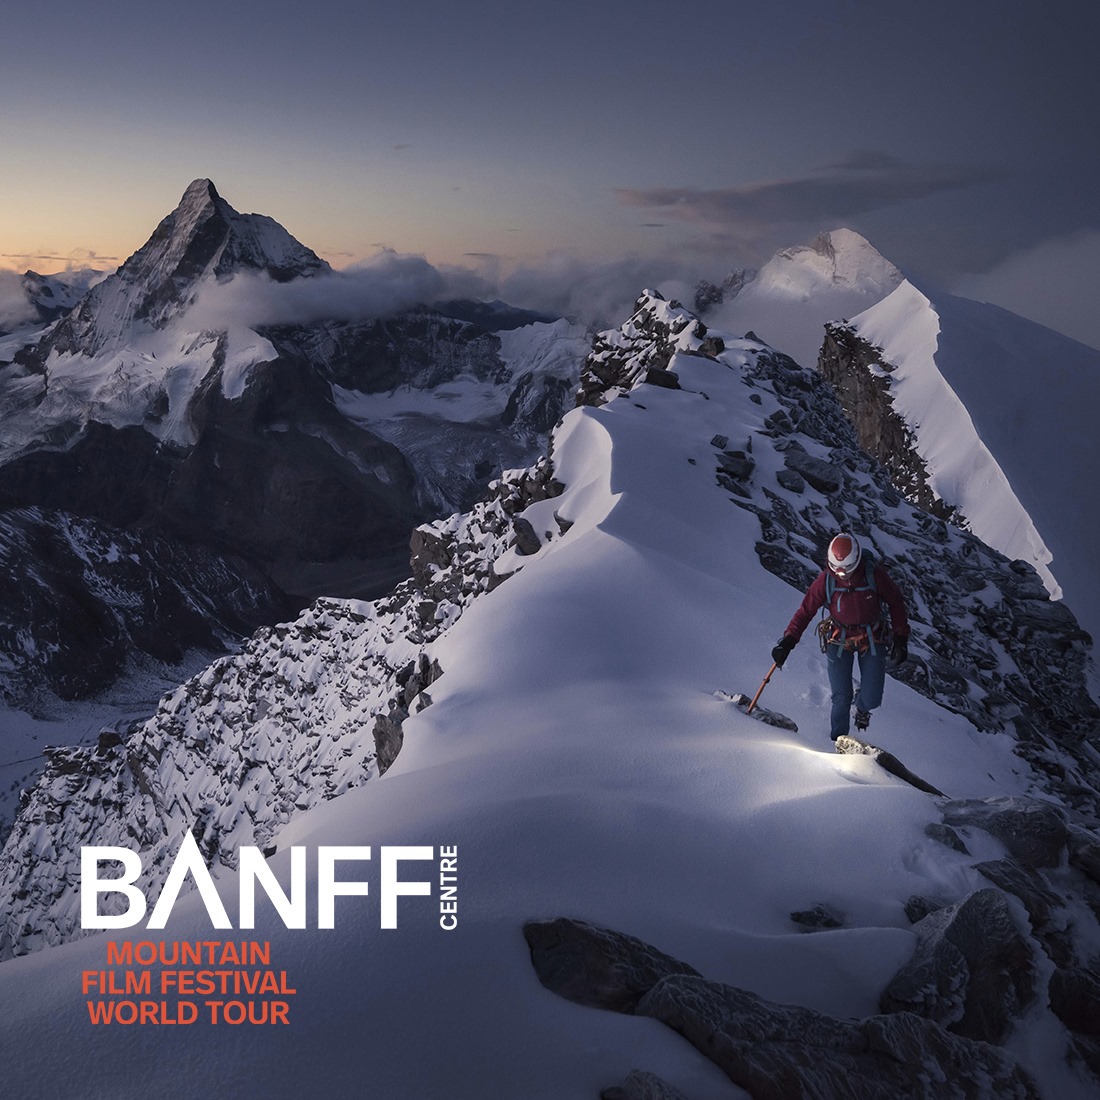 https://the-place-to-be.fr/wp-content/uploads/2020/09/banff-festival-begles-2020.jpg